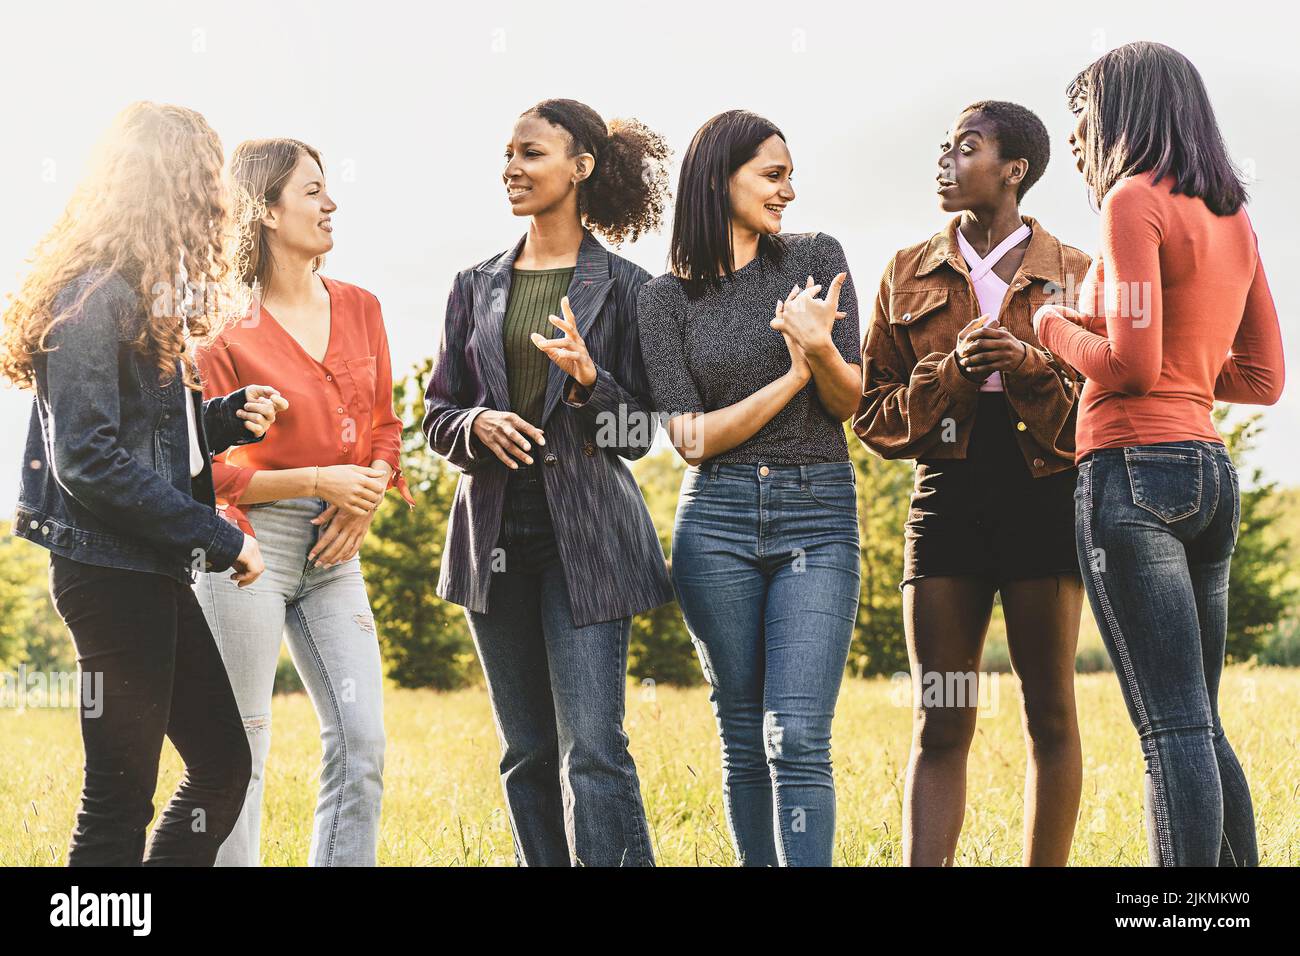 Group of multiethnic girlfriends chatting in the park - millennials girls having fun together - people lifestyle concept Stock Photo